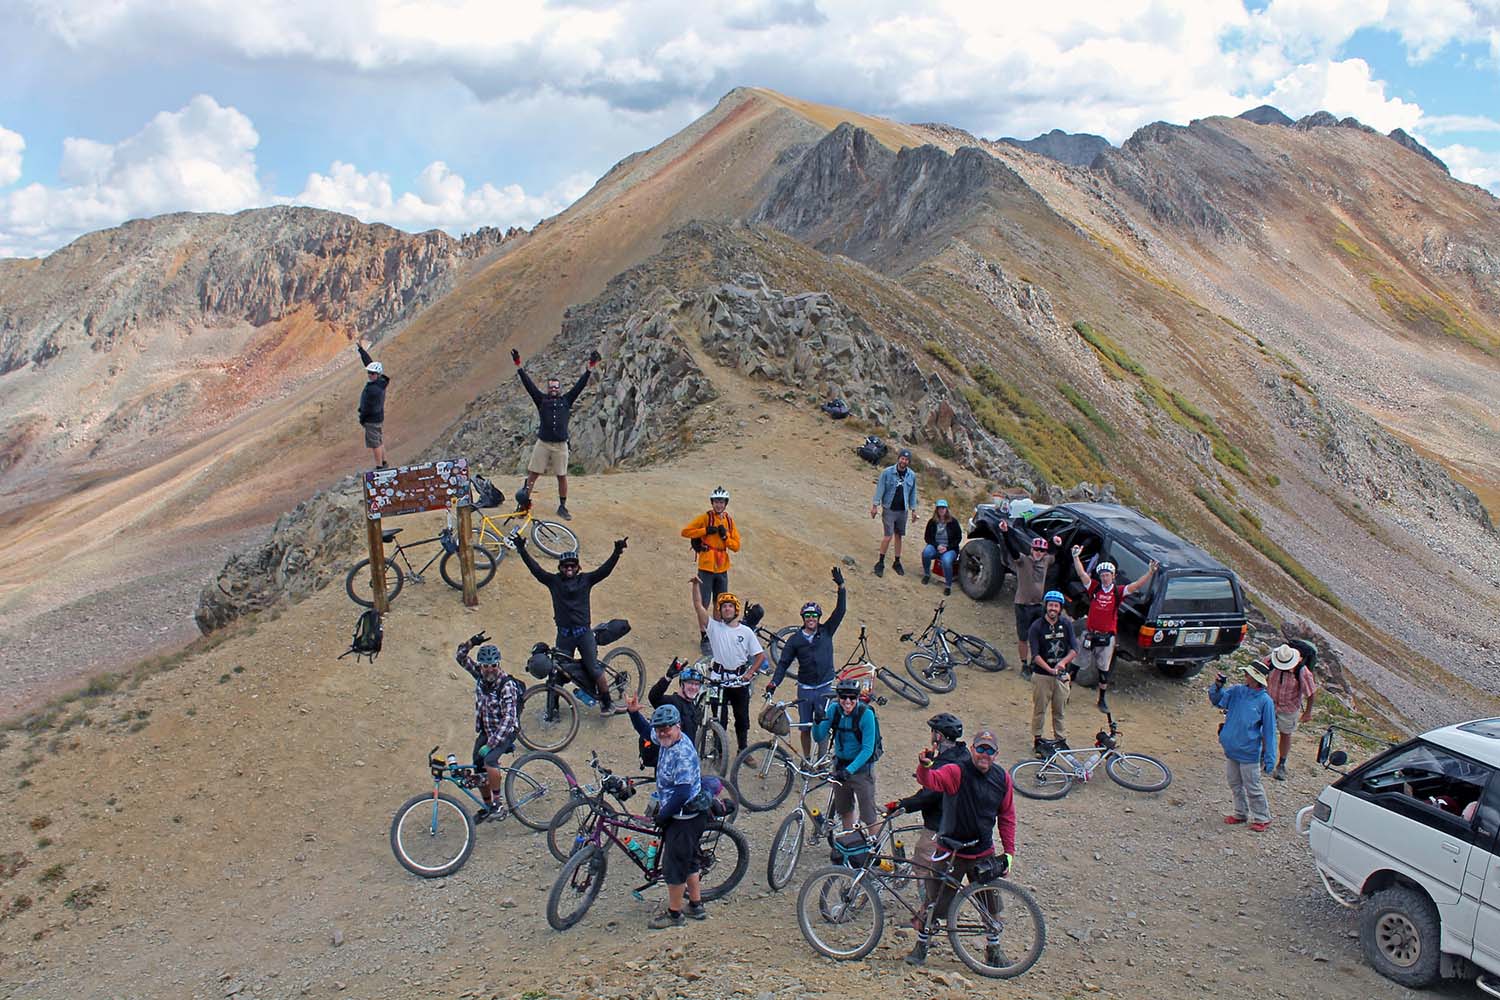 Pearl Pass Tour riders on the summit of Pearl pass on the way to Aspen from Crested Butte.  Photo by Rob Korotky